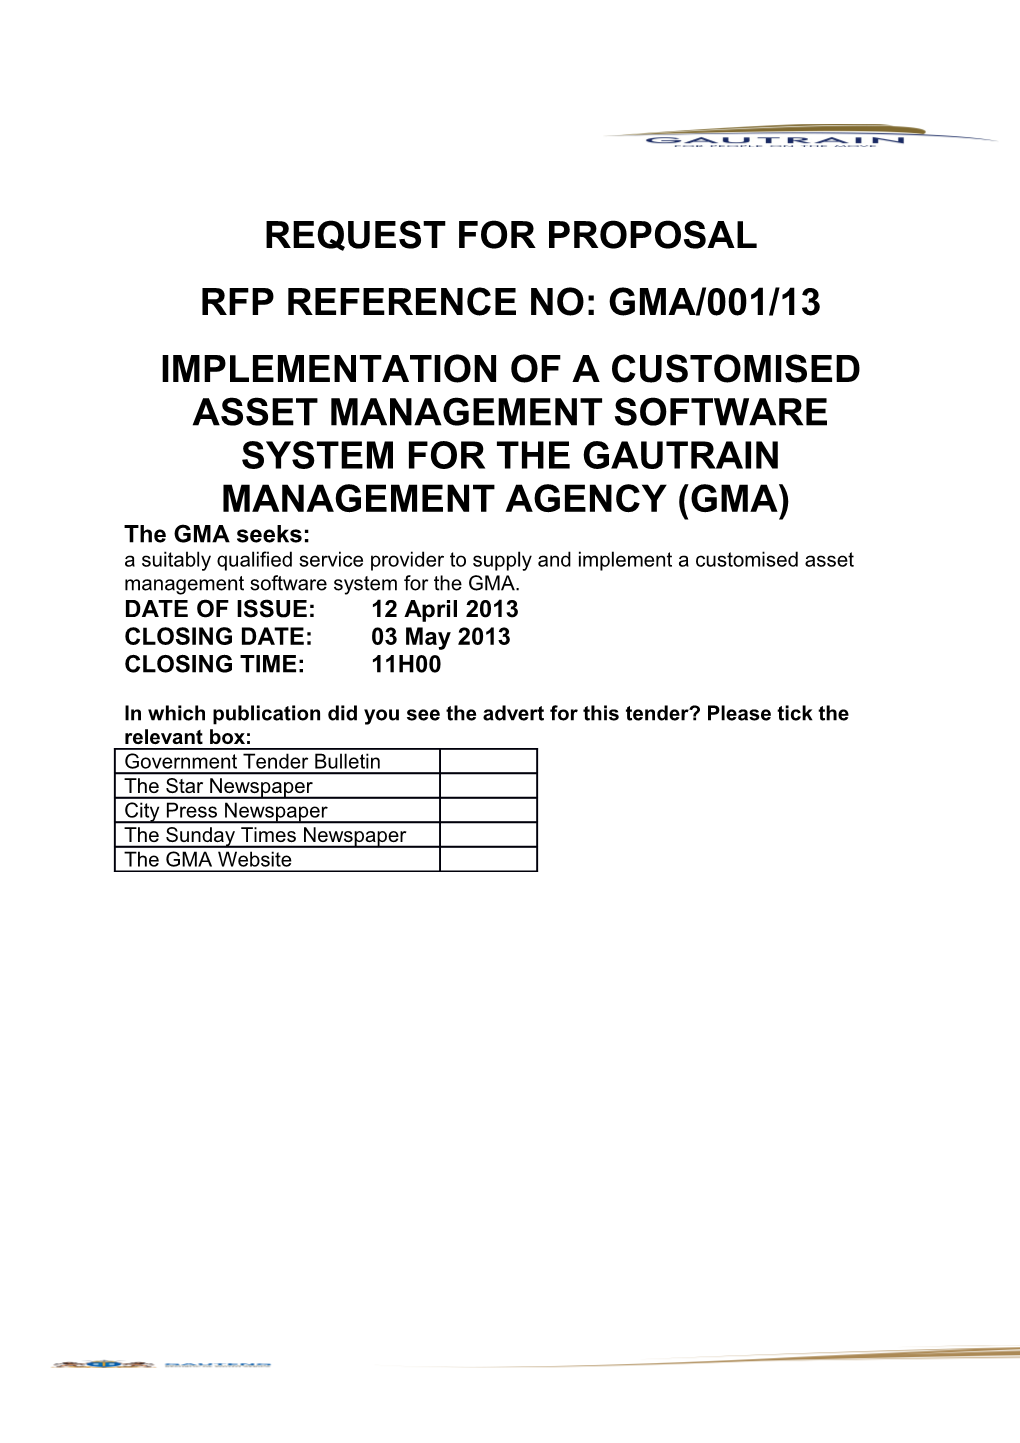 Bid No: Gma/001/13Customised Asset Management Software System for the Gma